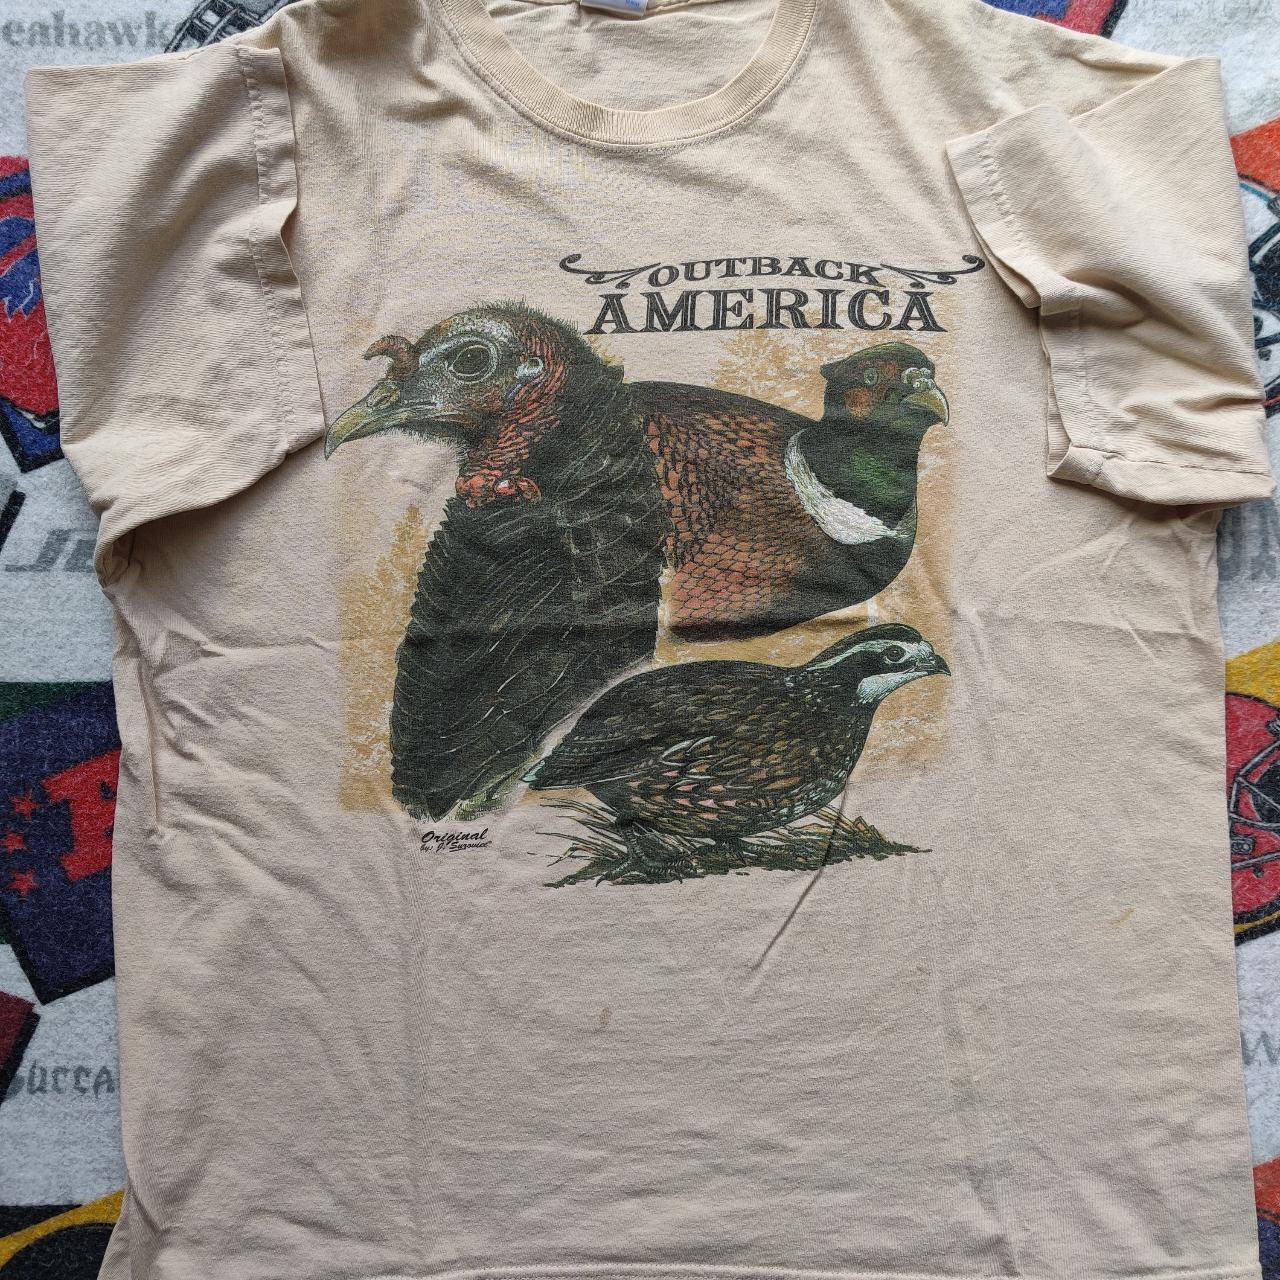 Product Image 1 - Vintage Outback America T-Shirt
Used in